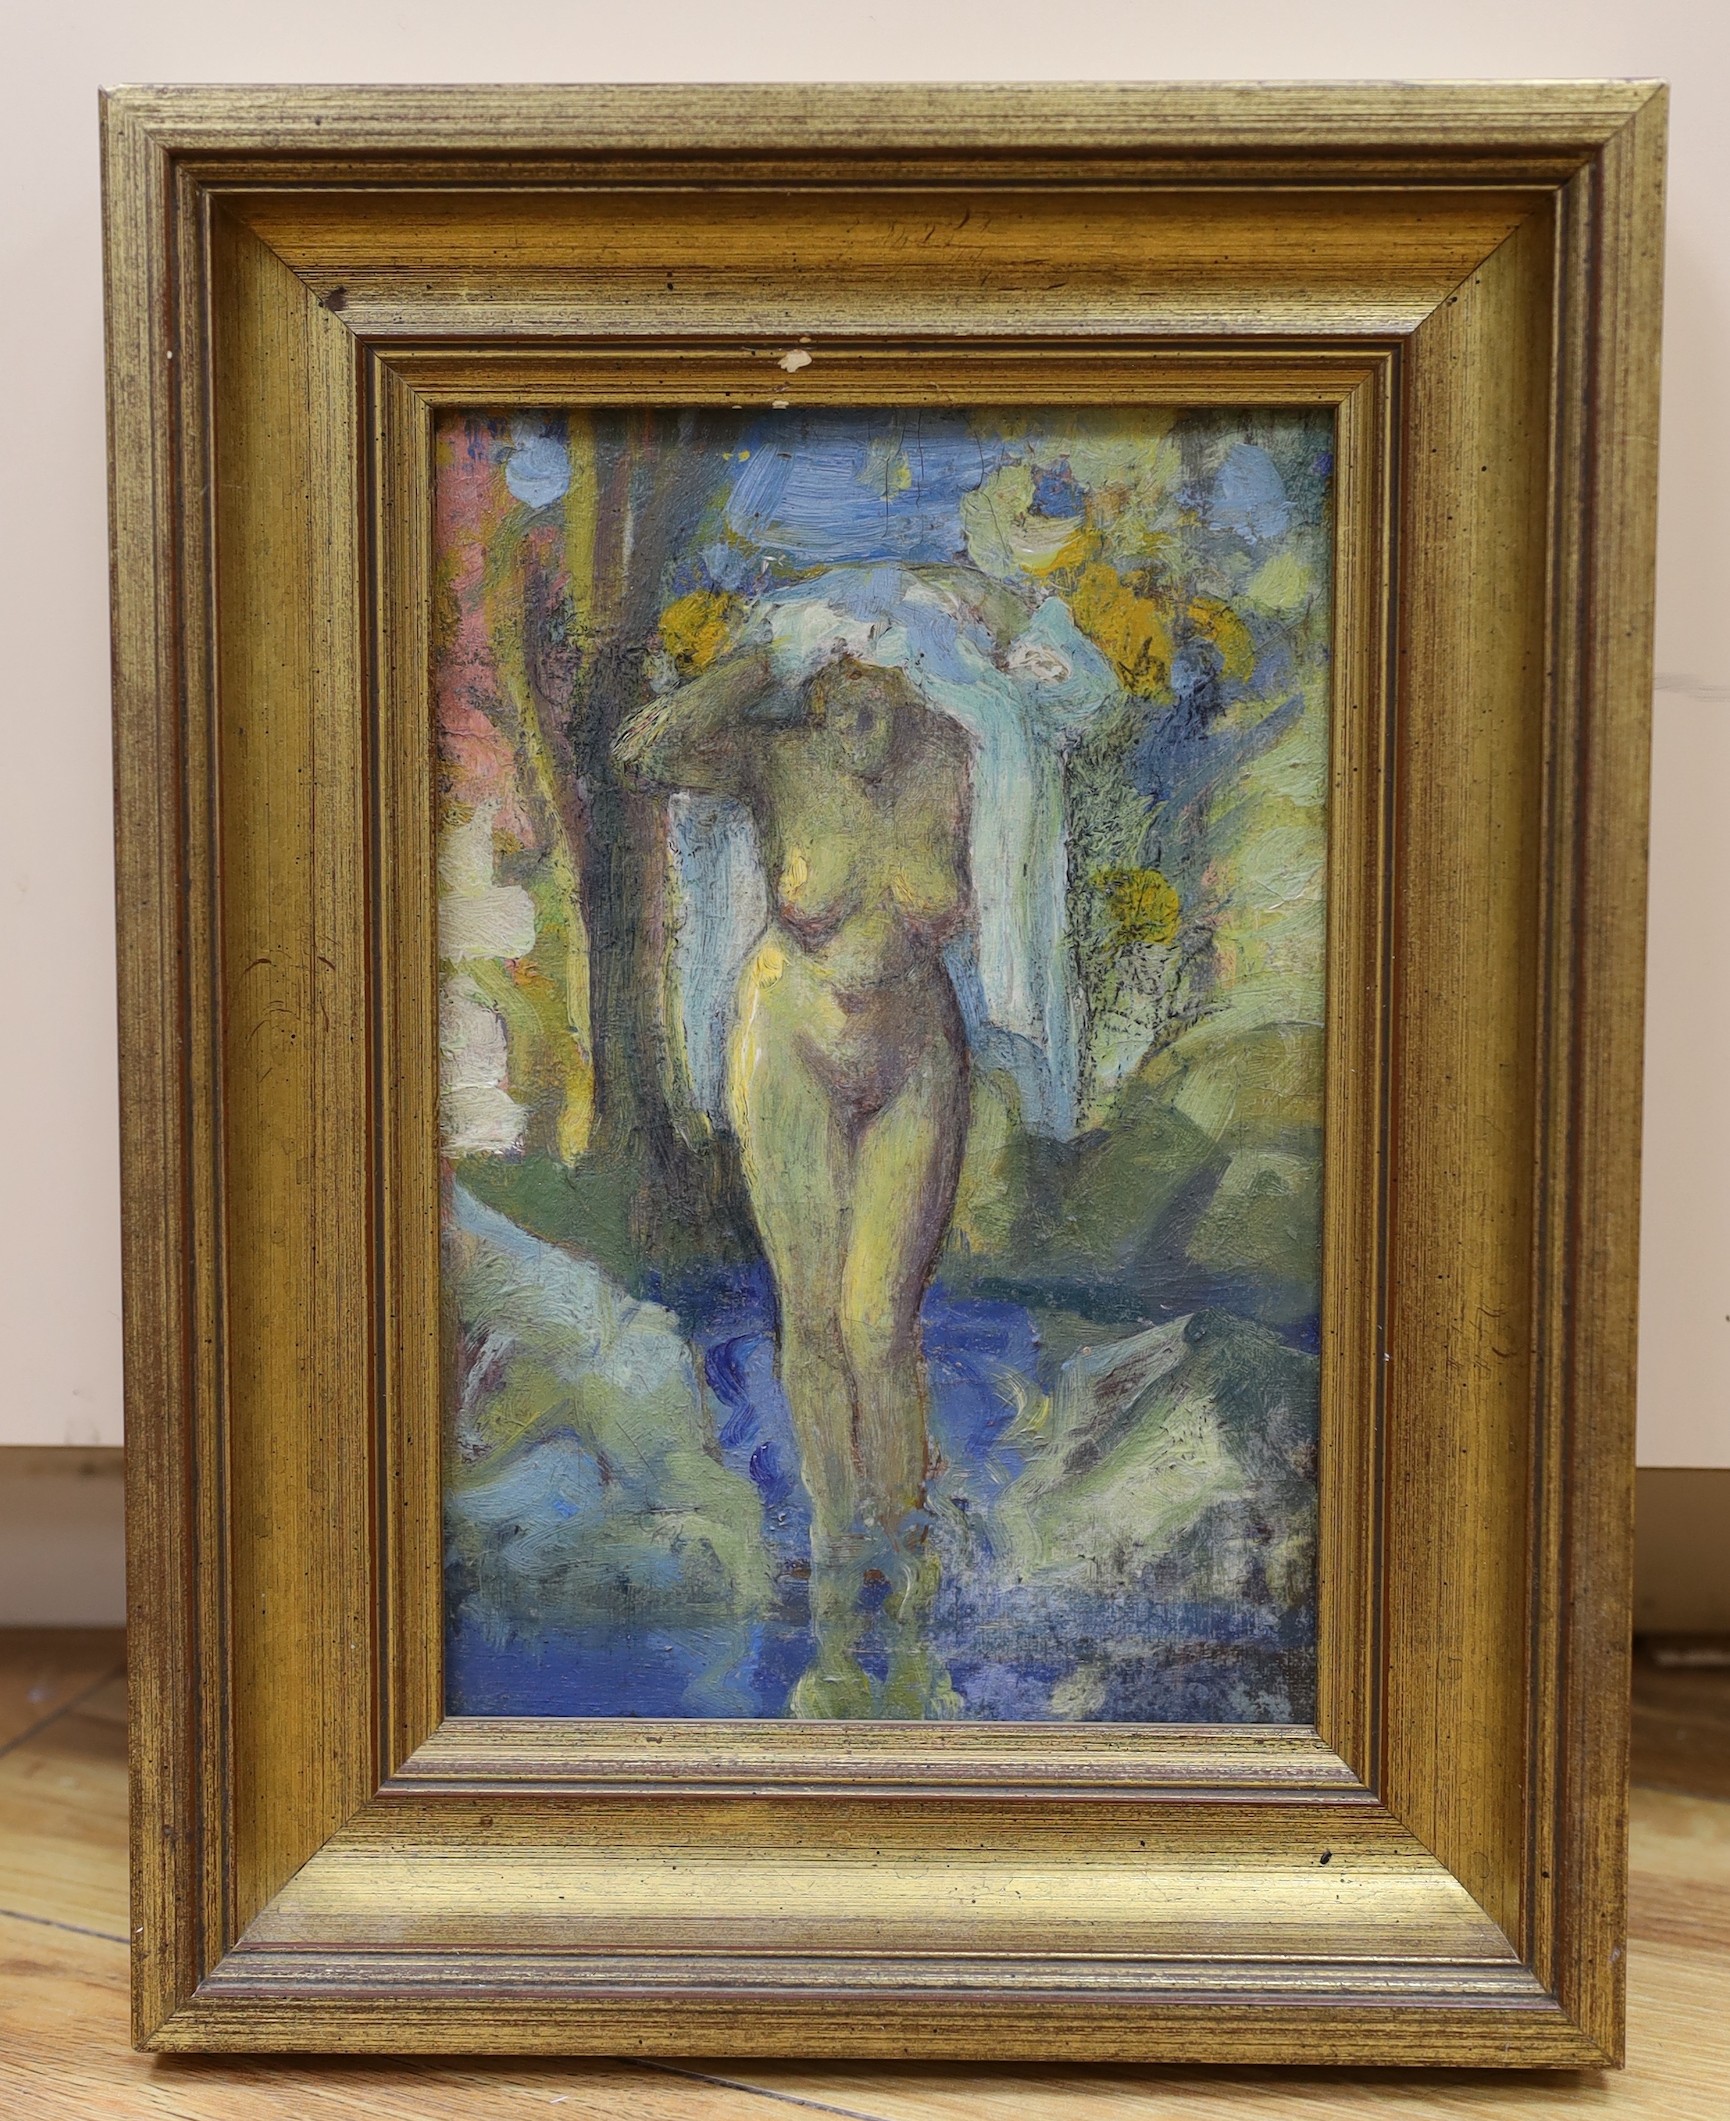 French School c.1900, oil on board, 'The Bather', 21 x 14.5cm